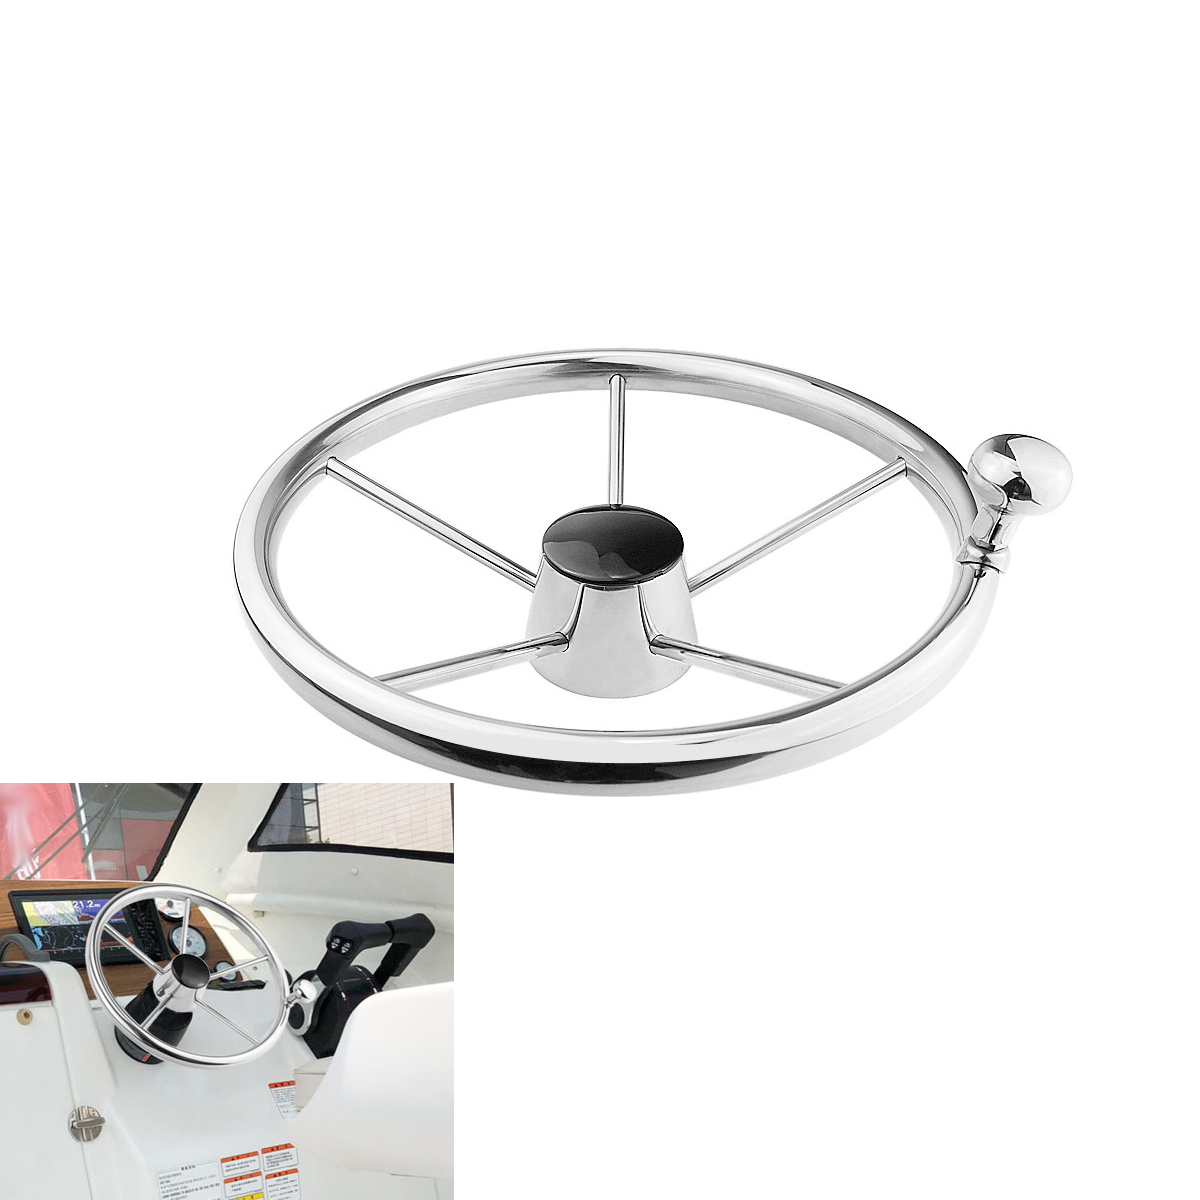 

BSET MATEL 13-1/2'' 342mm Steering Wheel Stainless Steel 316 Marine Grade with Spinner Handle Knob Boat Yacht